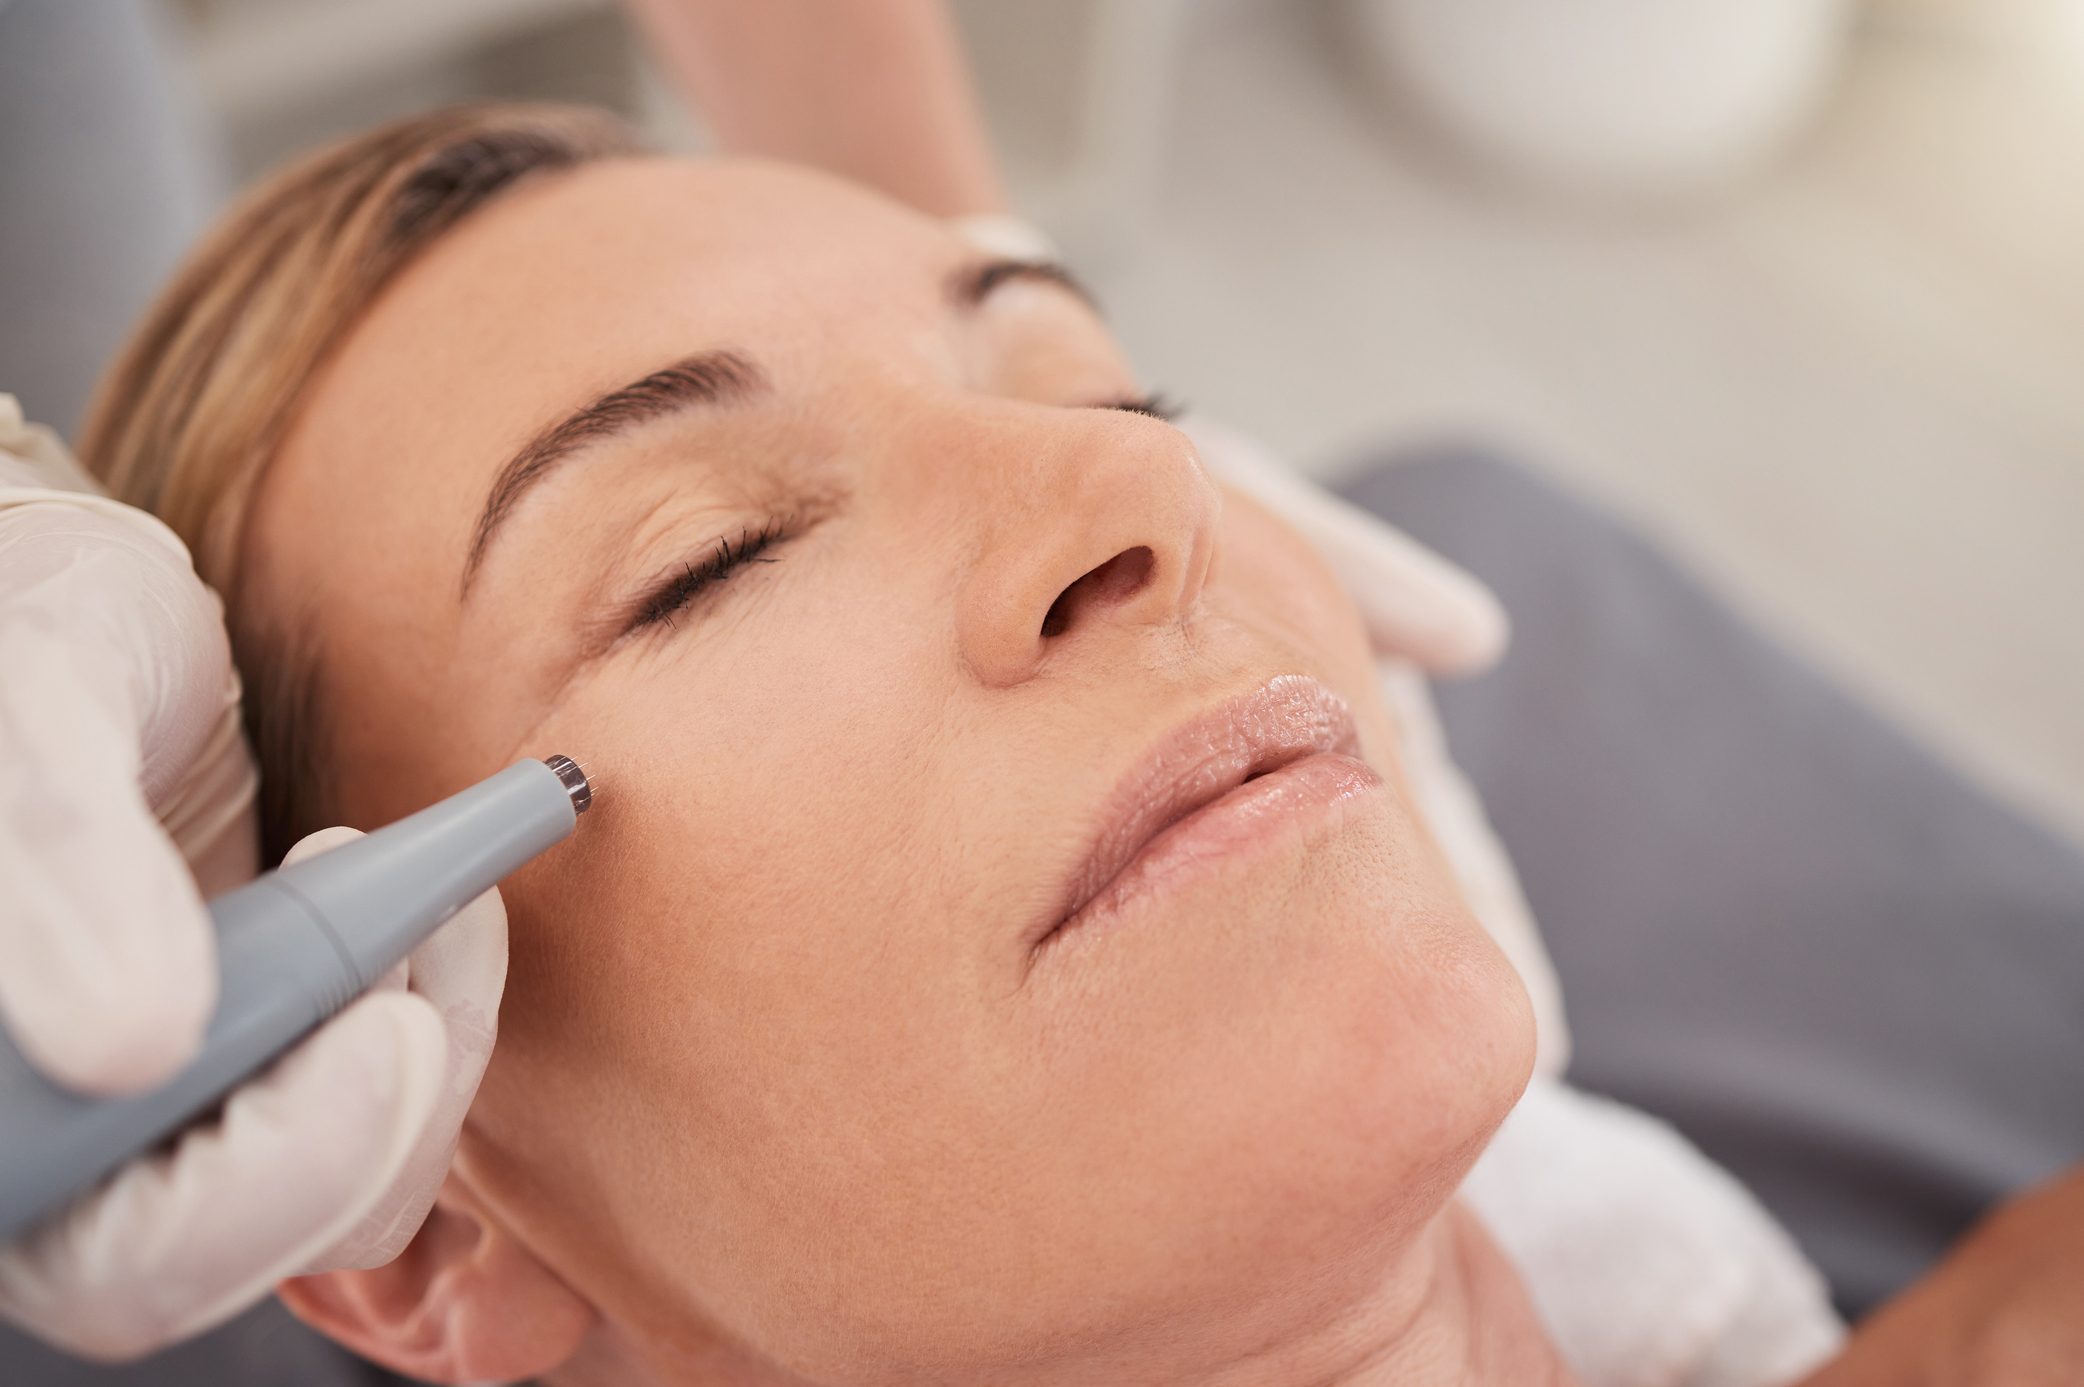 The Pros And Cons Of Popular Anti-Aging Treatments